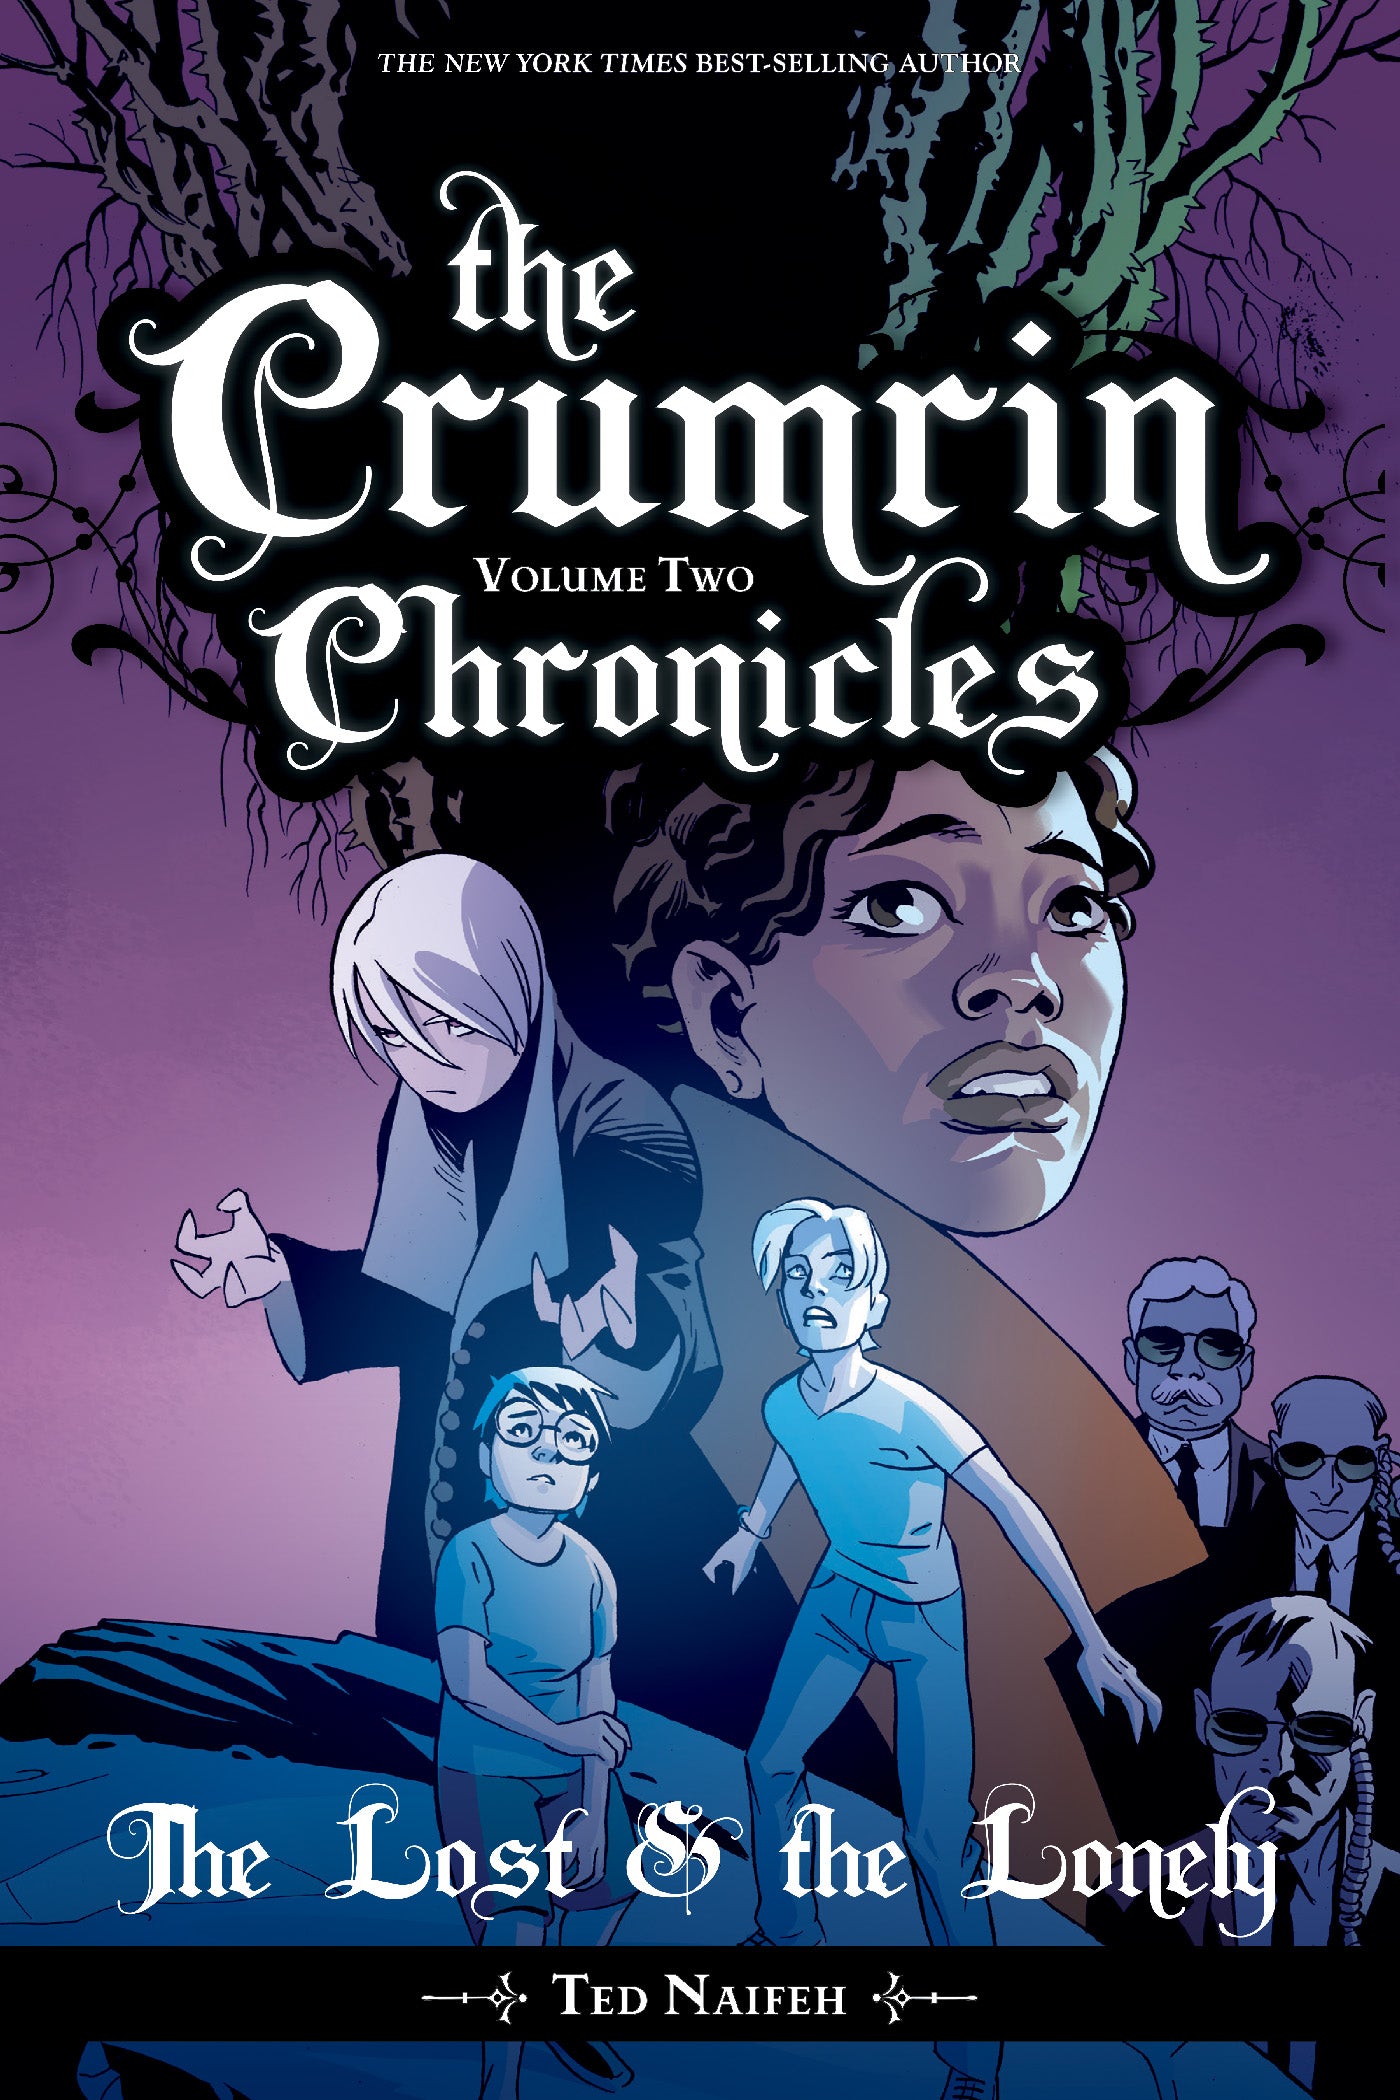 CRUMRIN CHRONICLES VOL 2 TRADE PAPERBACK THE LOST AND THE LONELY